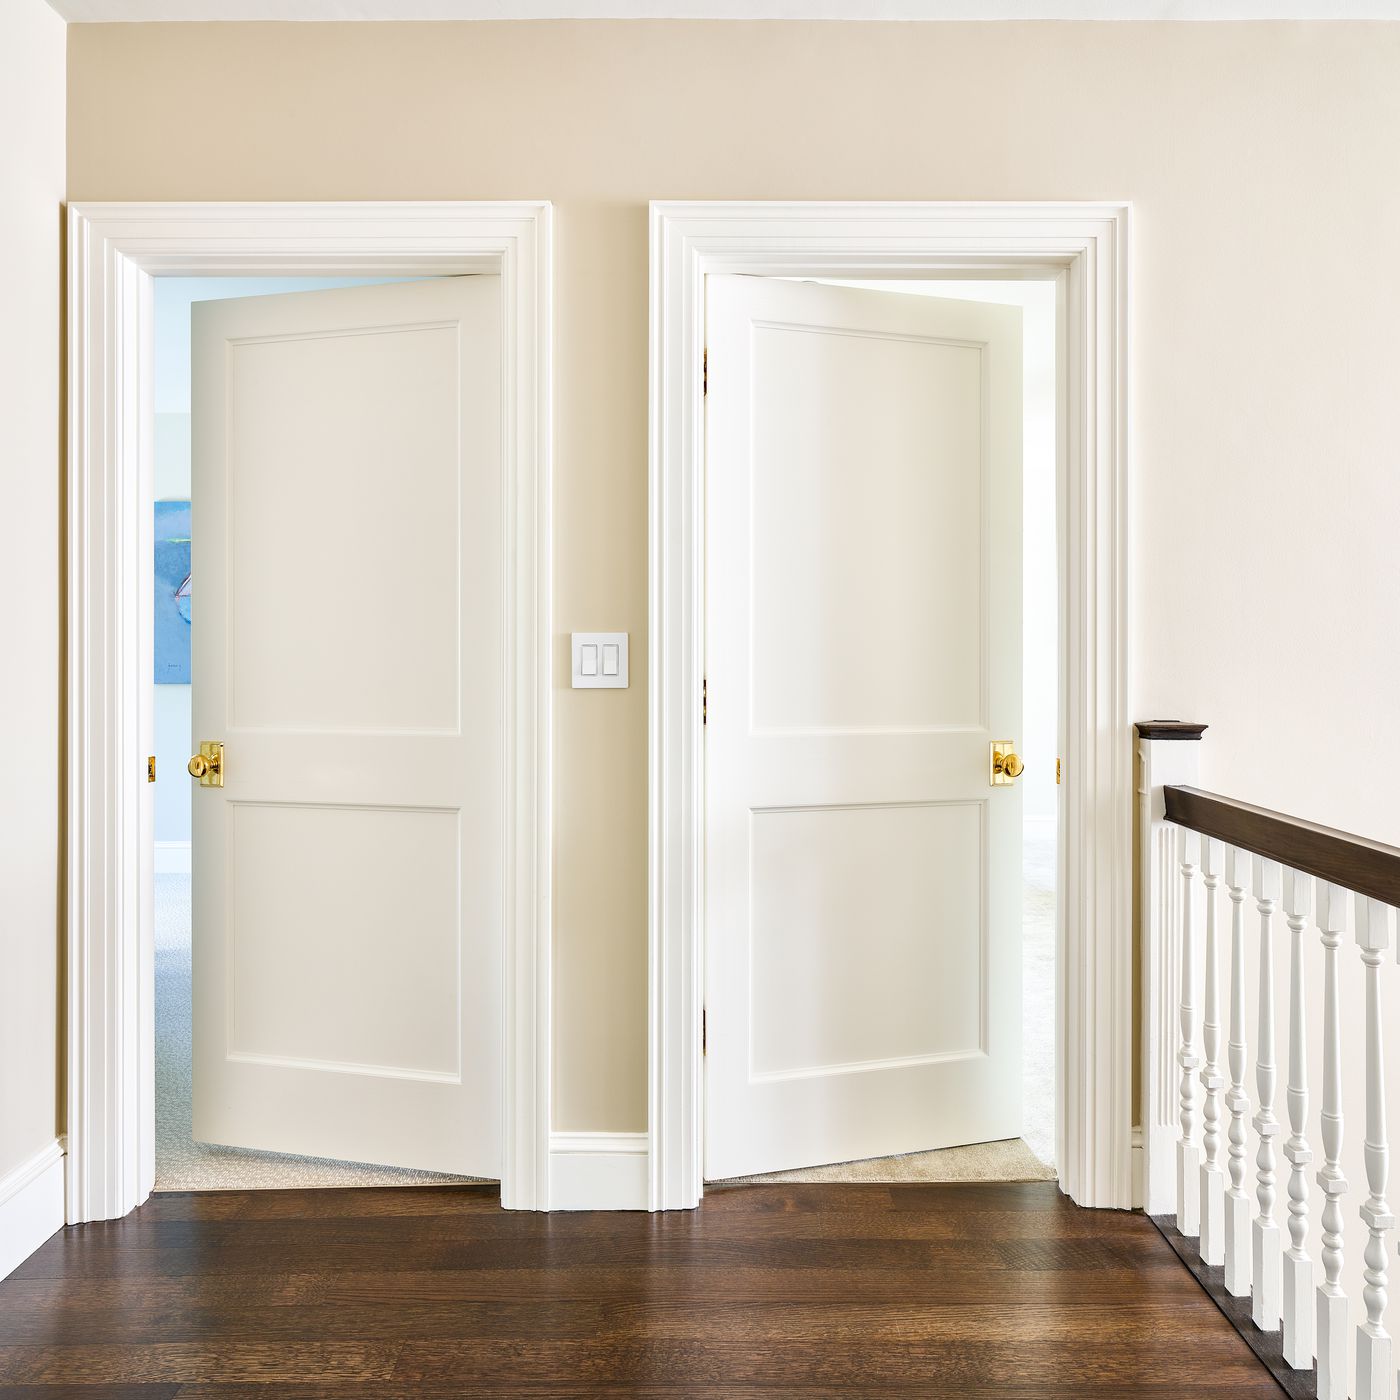 Diy Ways To Soundproof A Door This Old House